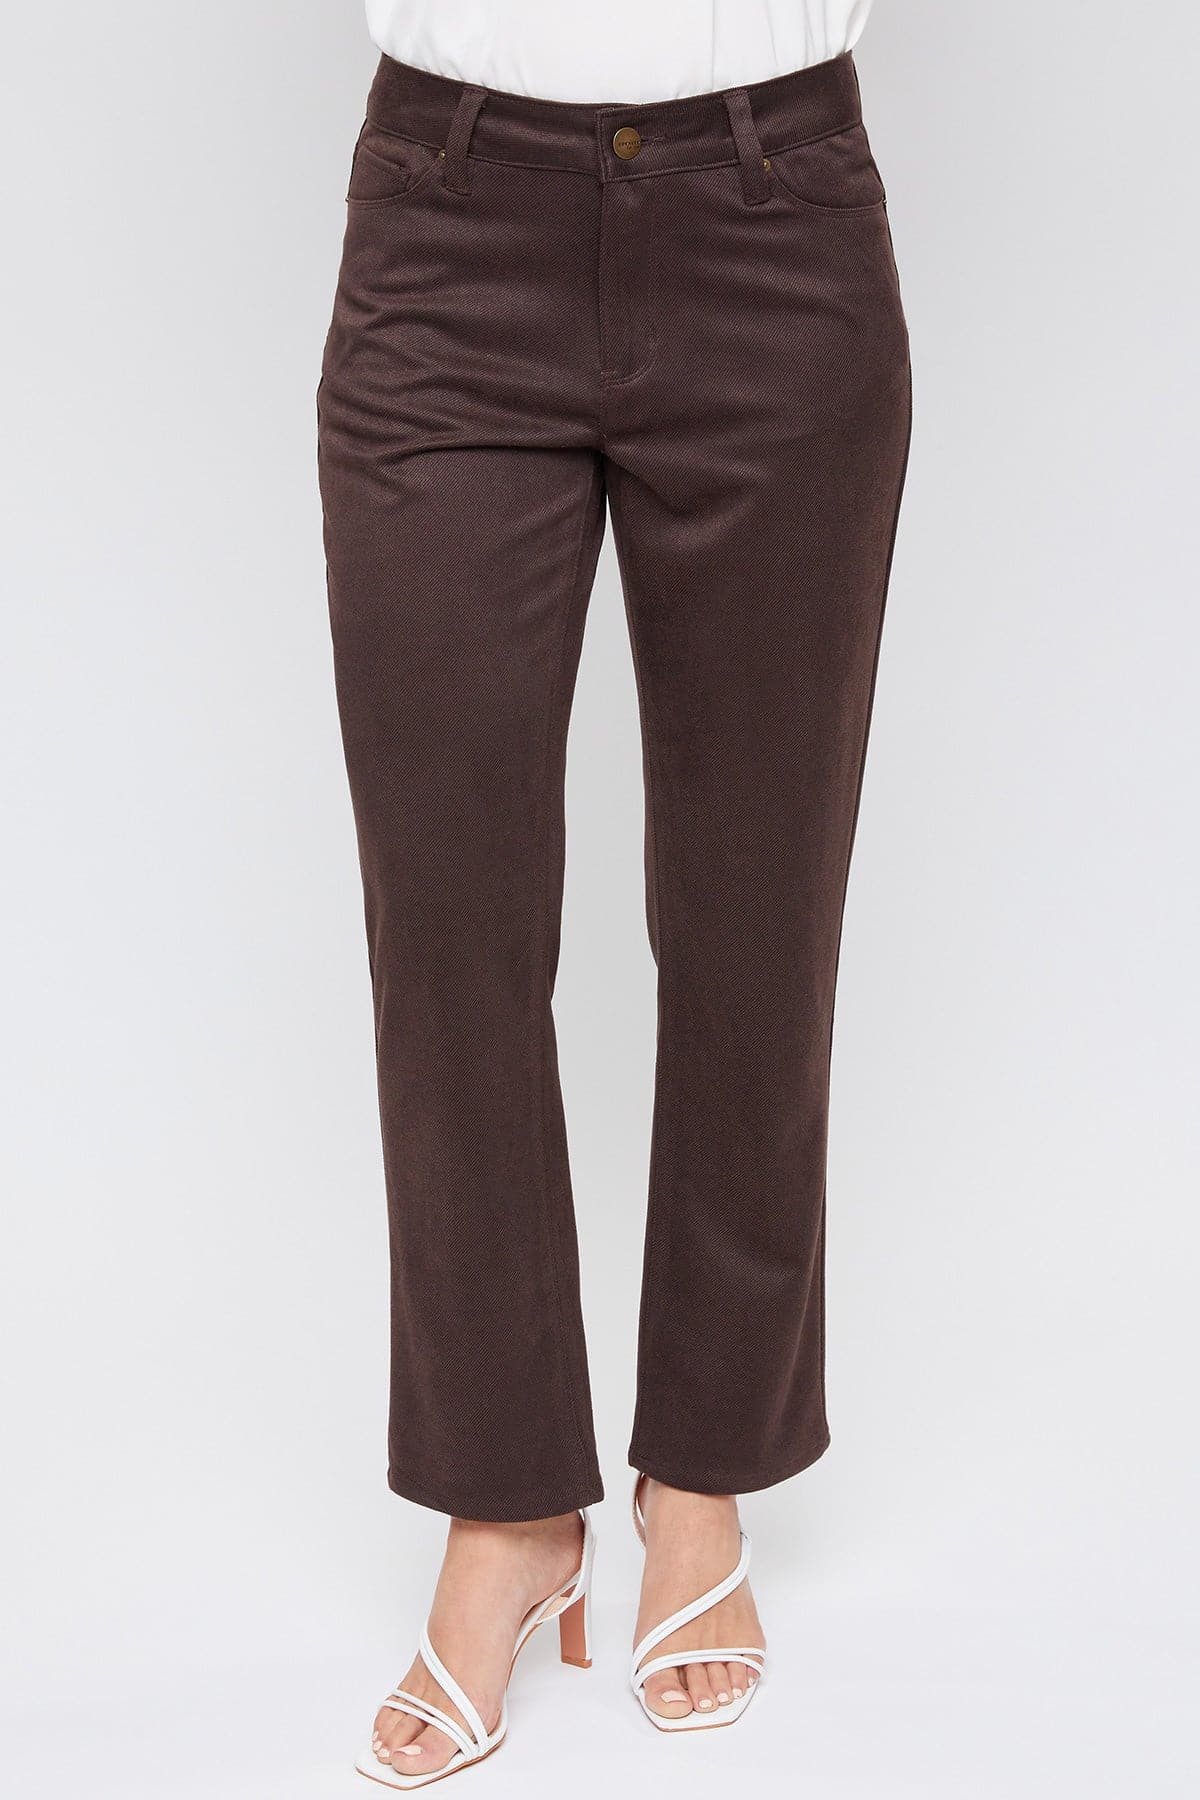 Women's Sueded Twill Comfort Stretch Straight Leg Pant